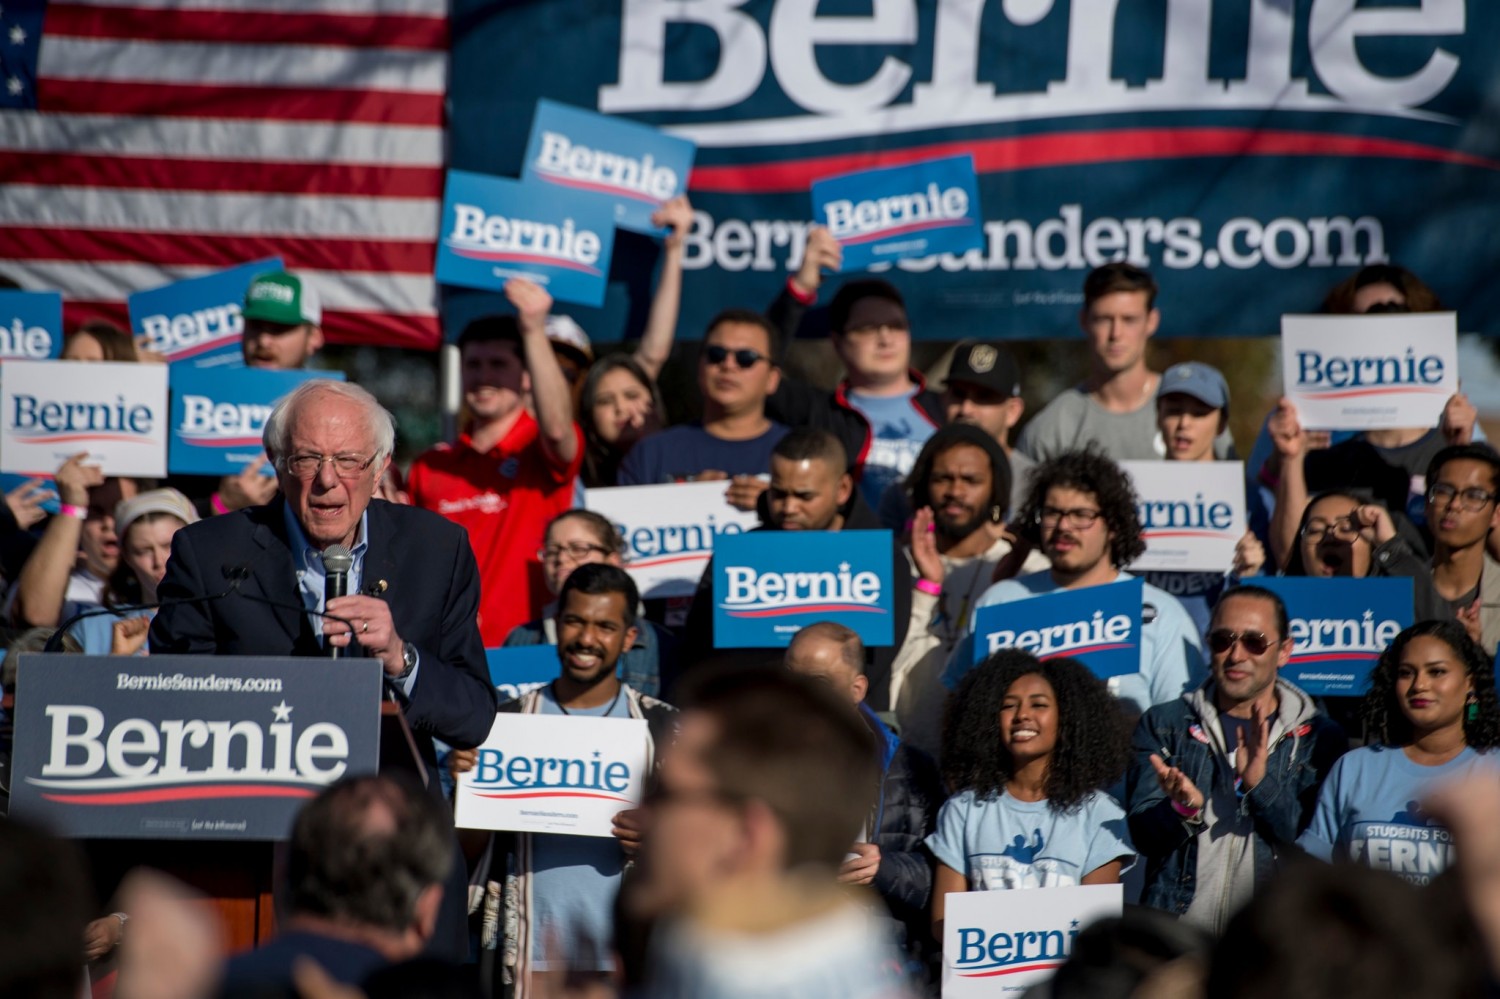 Senator Bernie Sanders at a “Get Out the Early Vote” rally at the University of Nevada in Las Vegas this month.Credit...Bridget Bennett for The New York Times